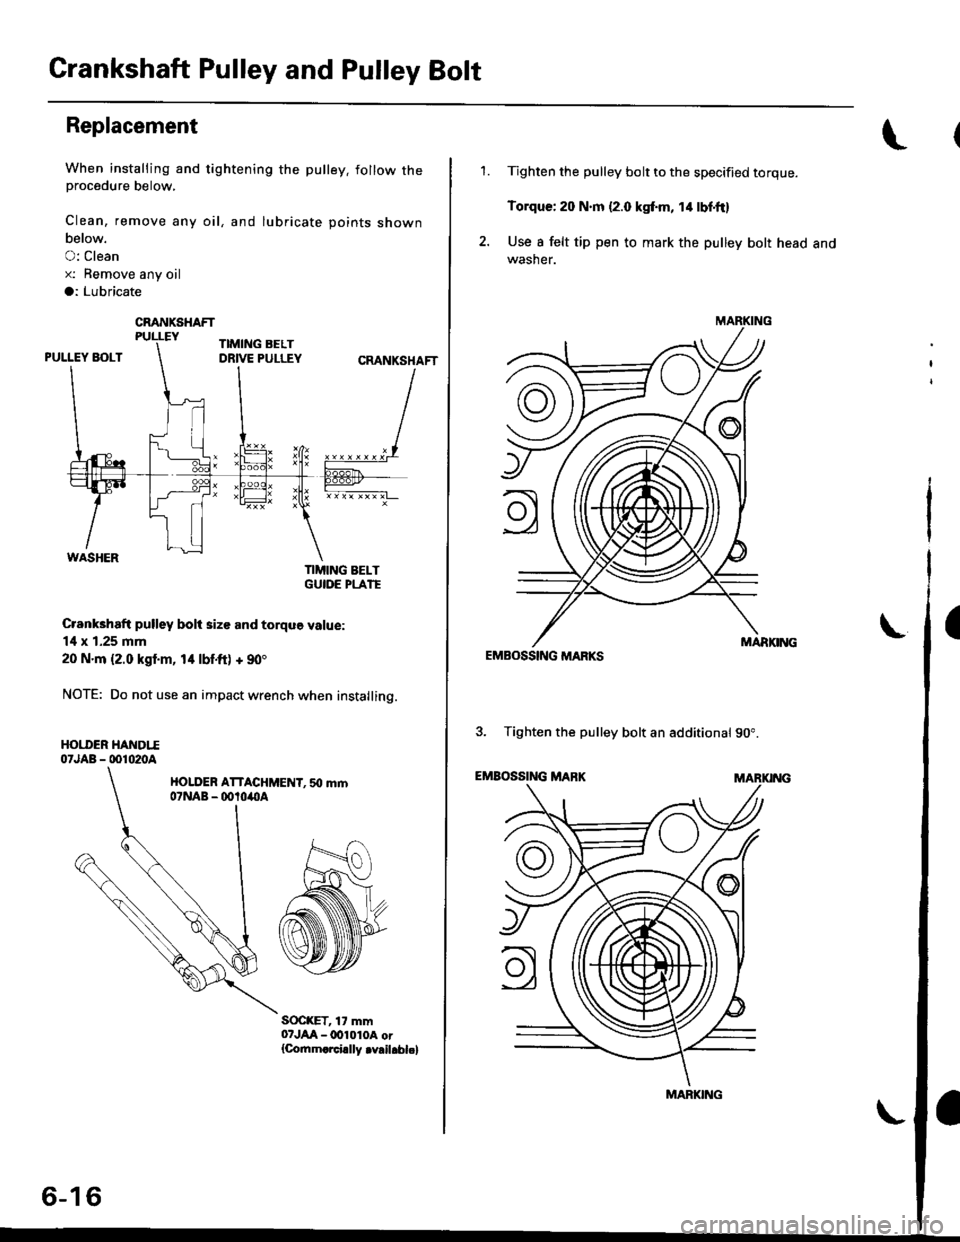 HONDA CIVIC 1998 6.G Workshop Manual Crankshaft Pulley and Pulley Bolt
Replacement
When installing and tightening the pulley. follow theprocedure below,
Clean, remove any oil, and lubricate points shown
below.
O: Clean
x: Bemove any oil
